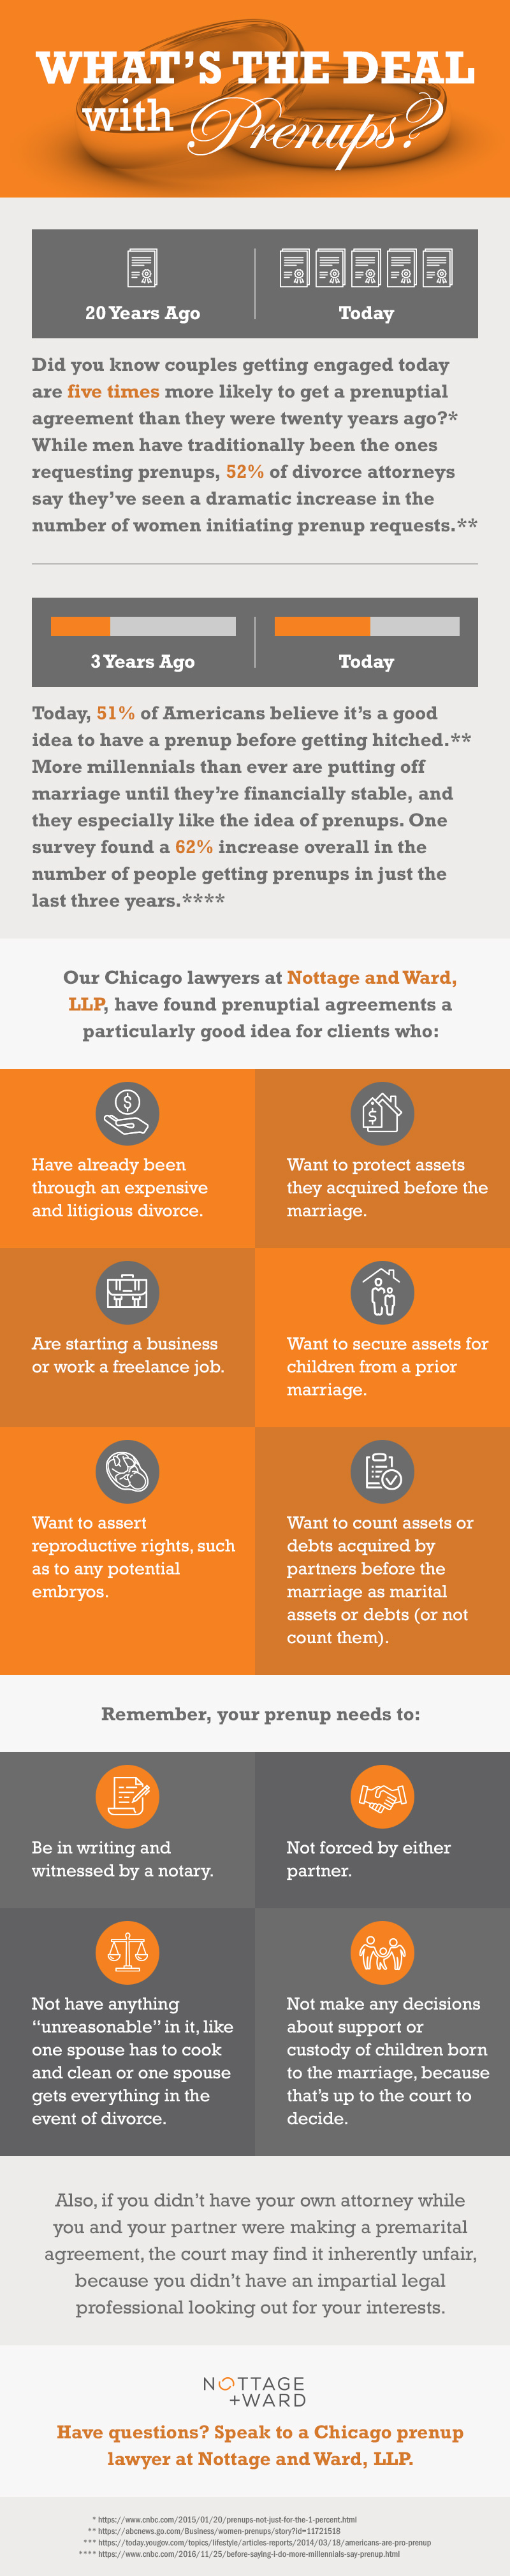 Nottage and Ward, LLP Presents: Prenup Infographic